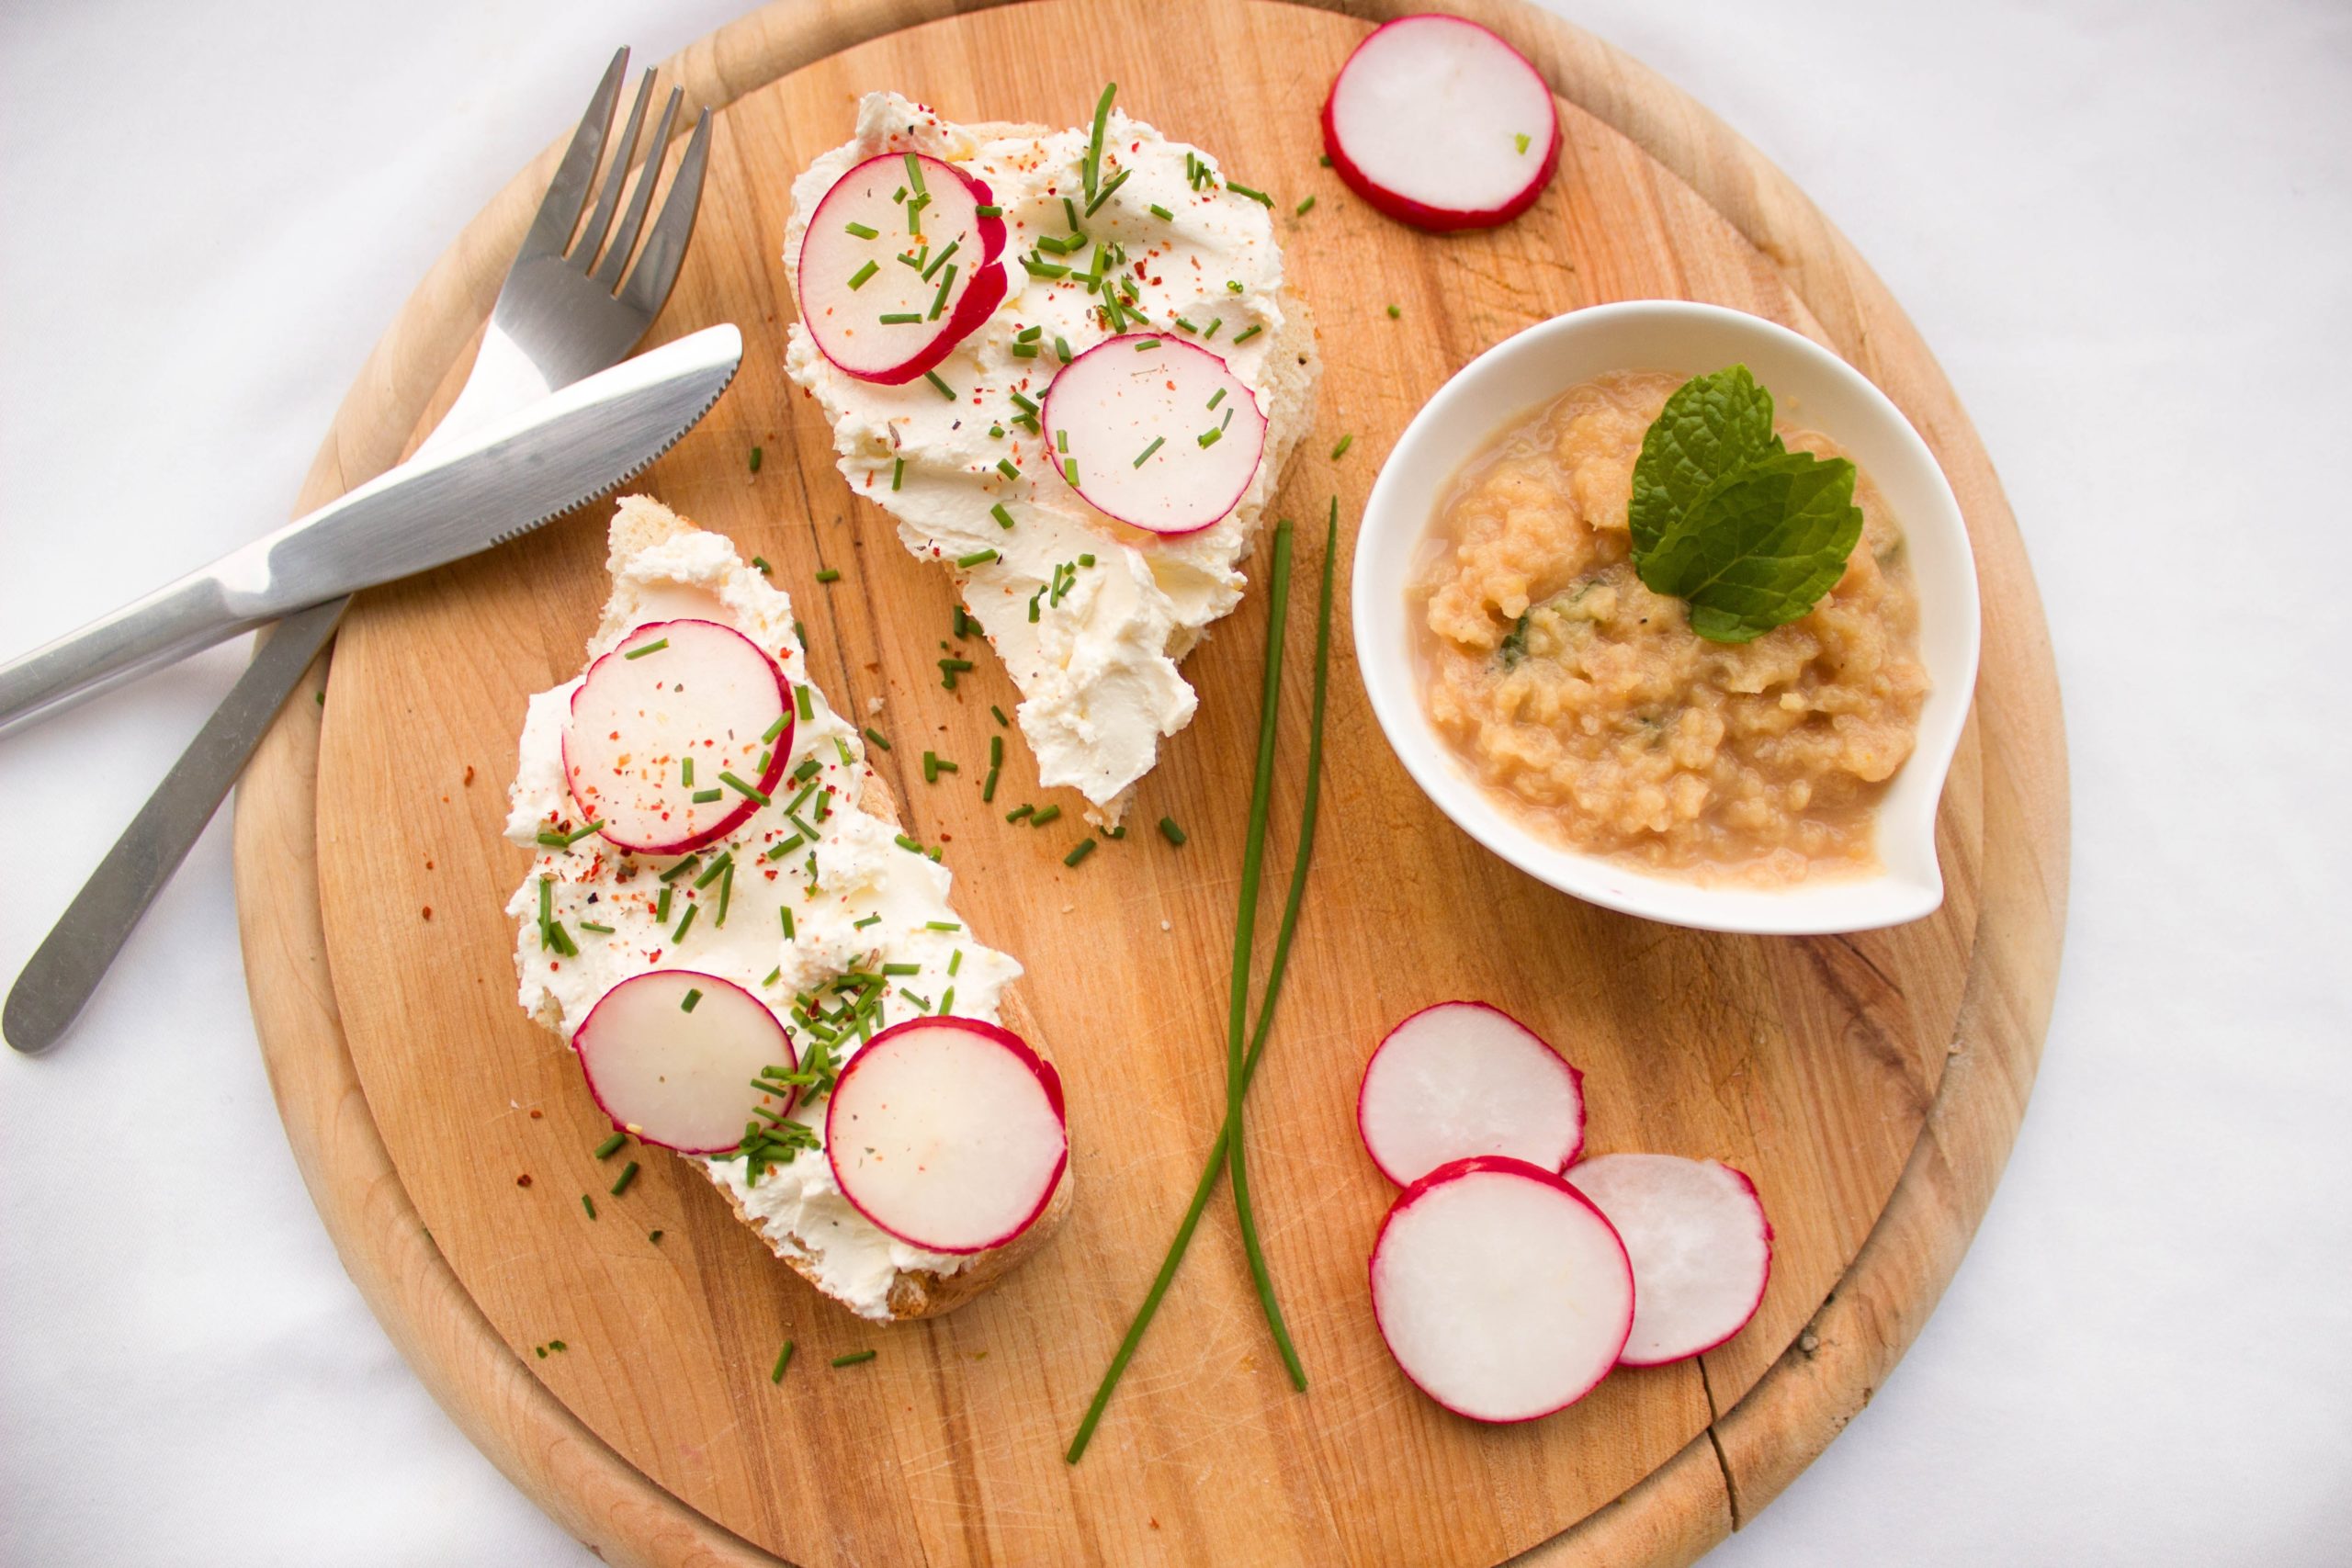 What Are French Breakfast Radishes?